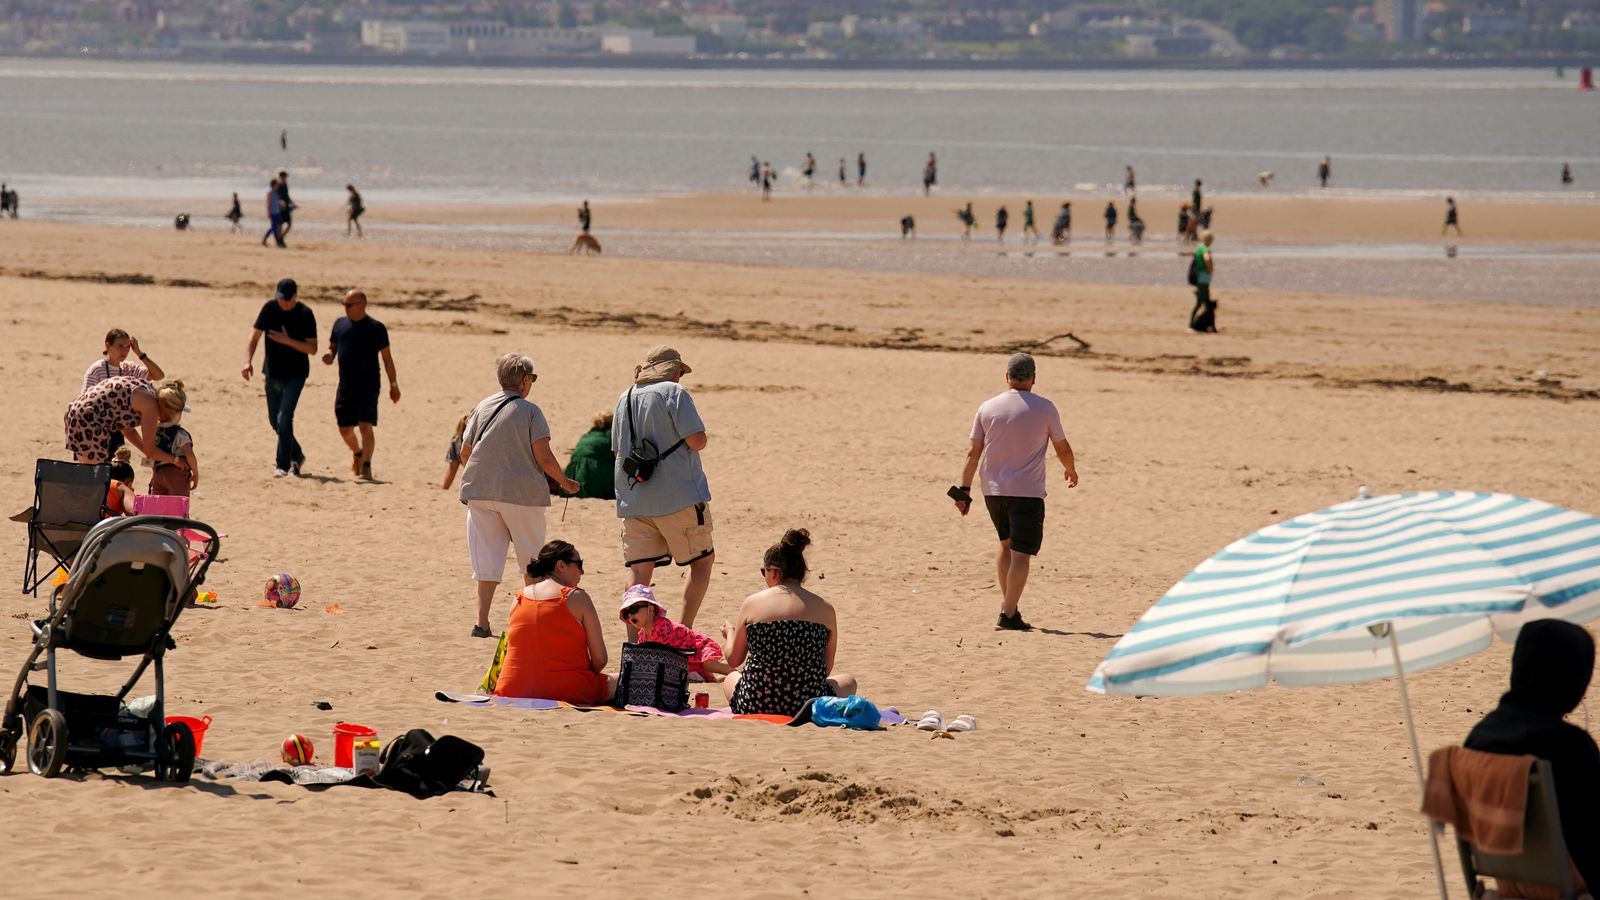 UK weather: Hottest day of the year so far as temperatures hit 28.3C - but cold front on the way